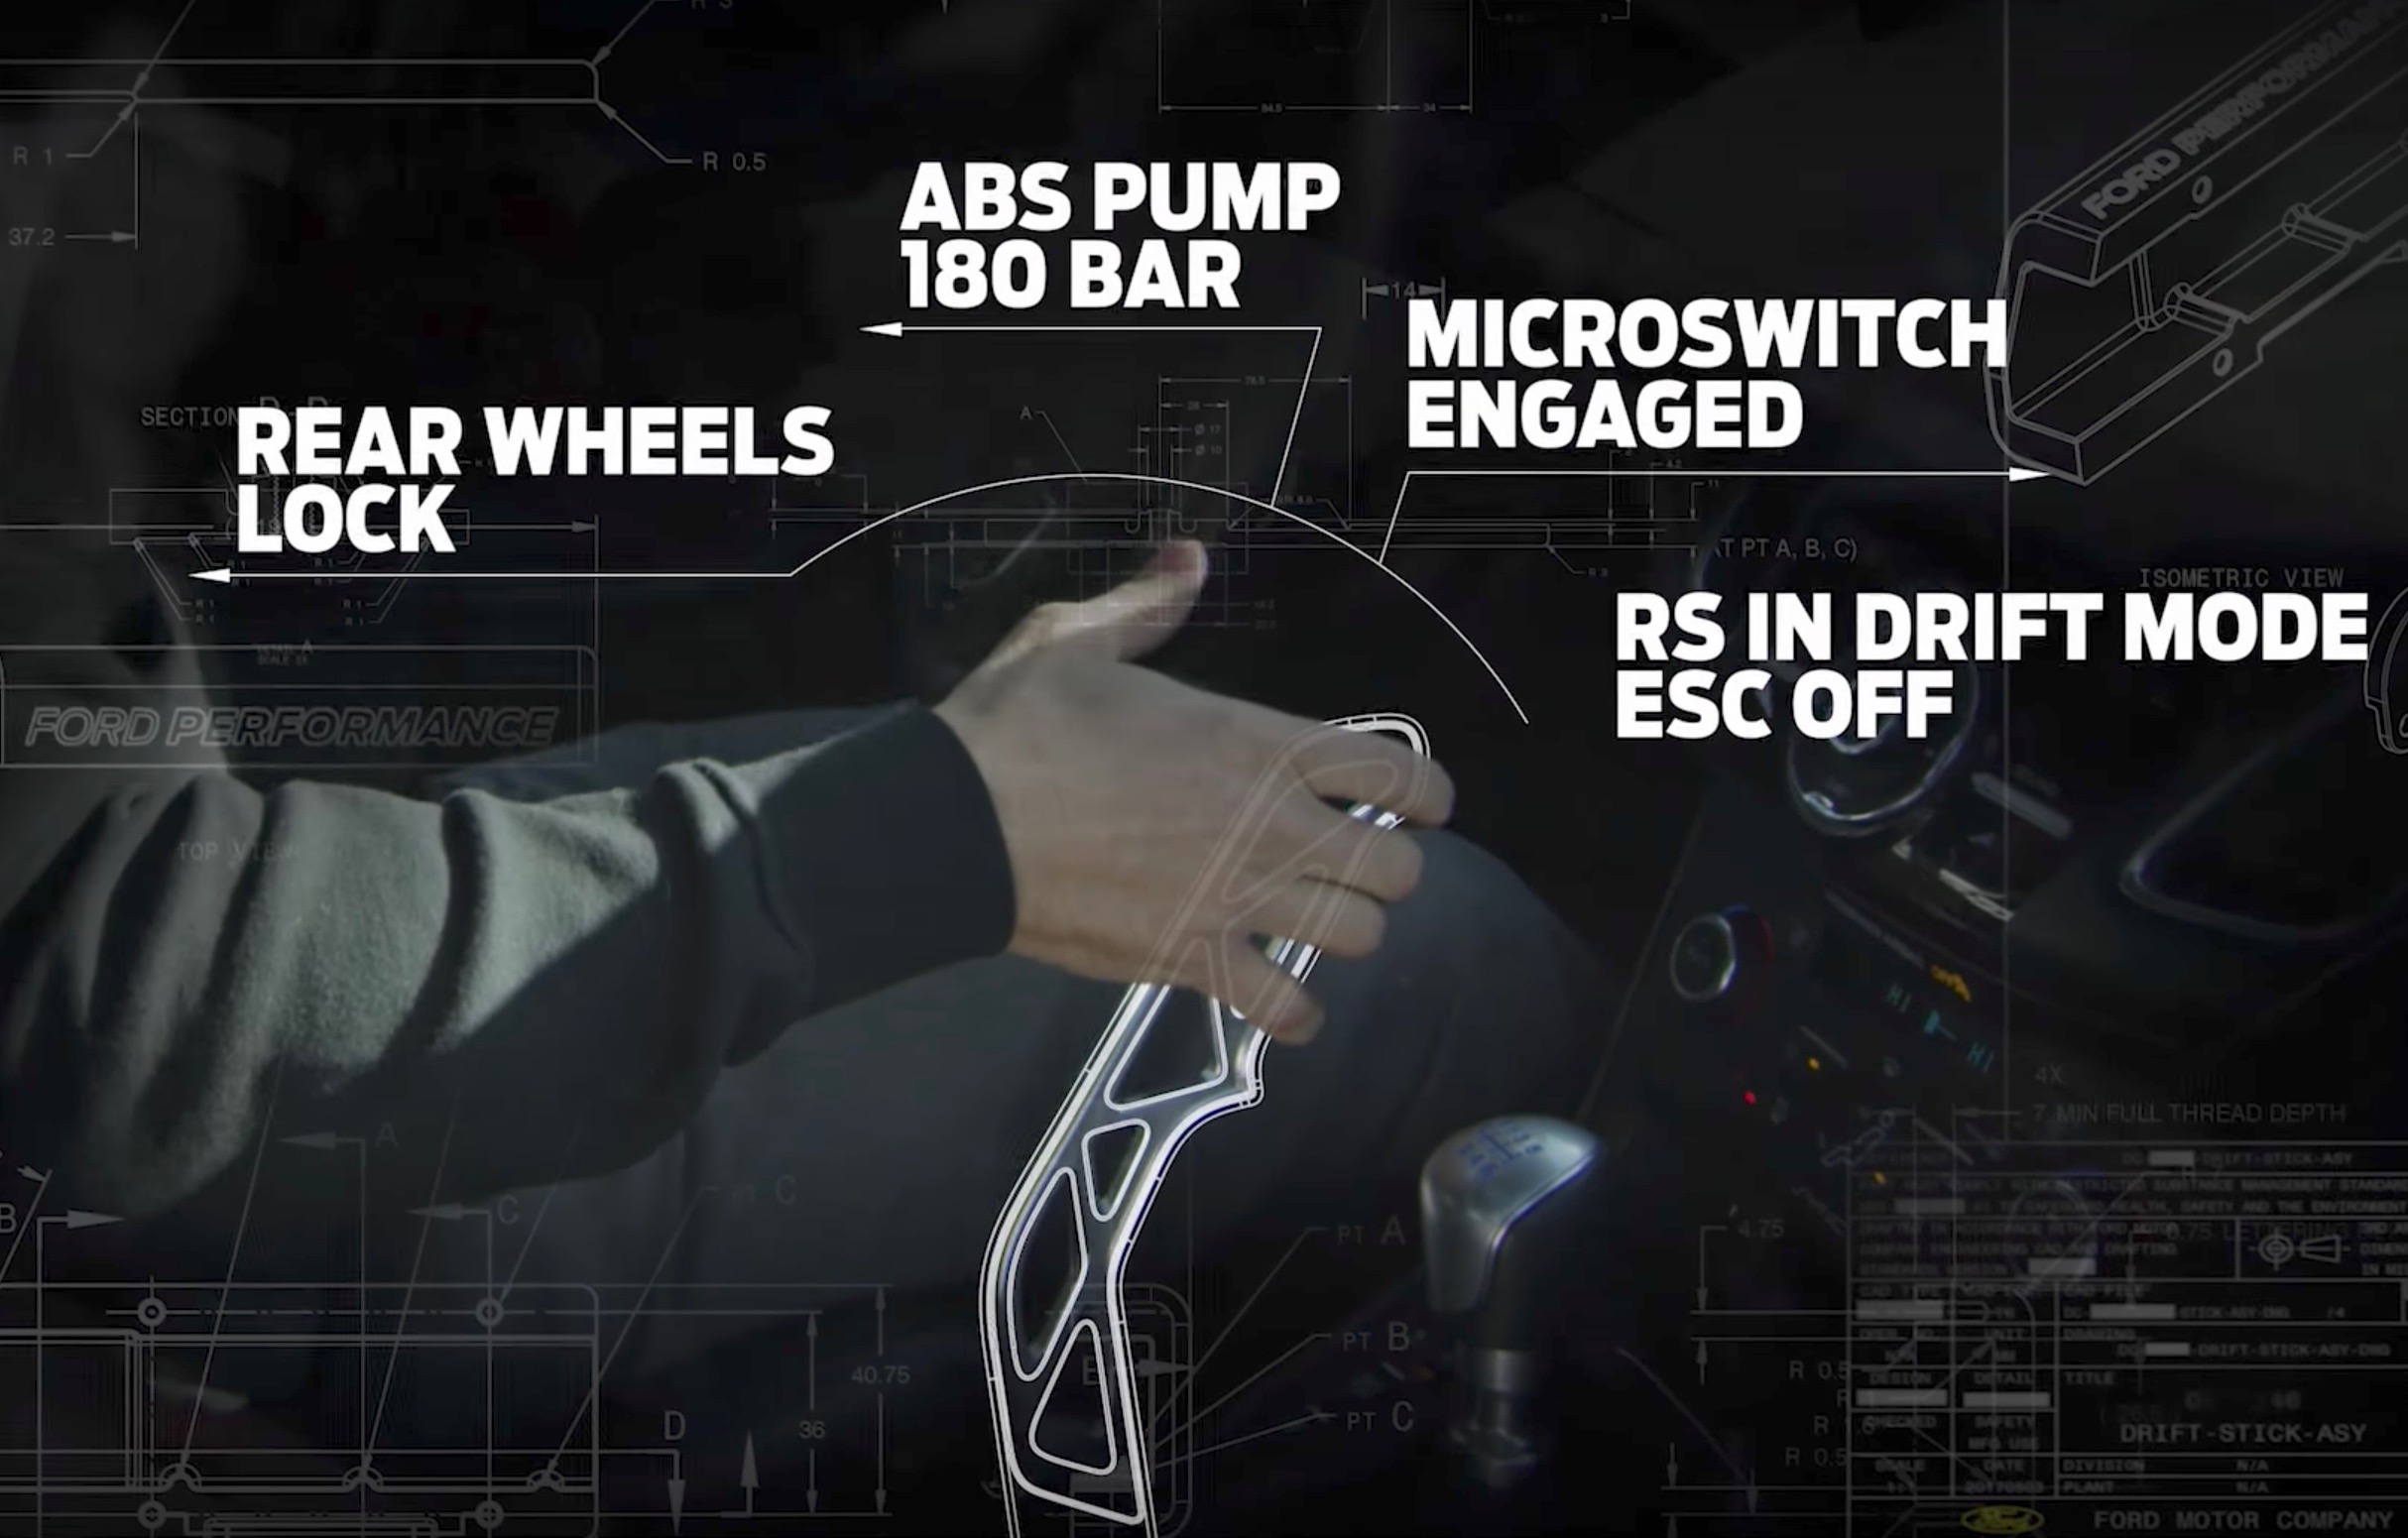 Ford Focus RS offered with factory ‘Drift Stick’ handbrake (video)